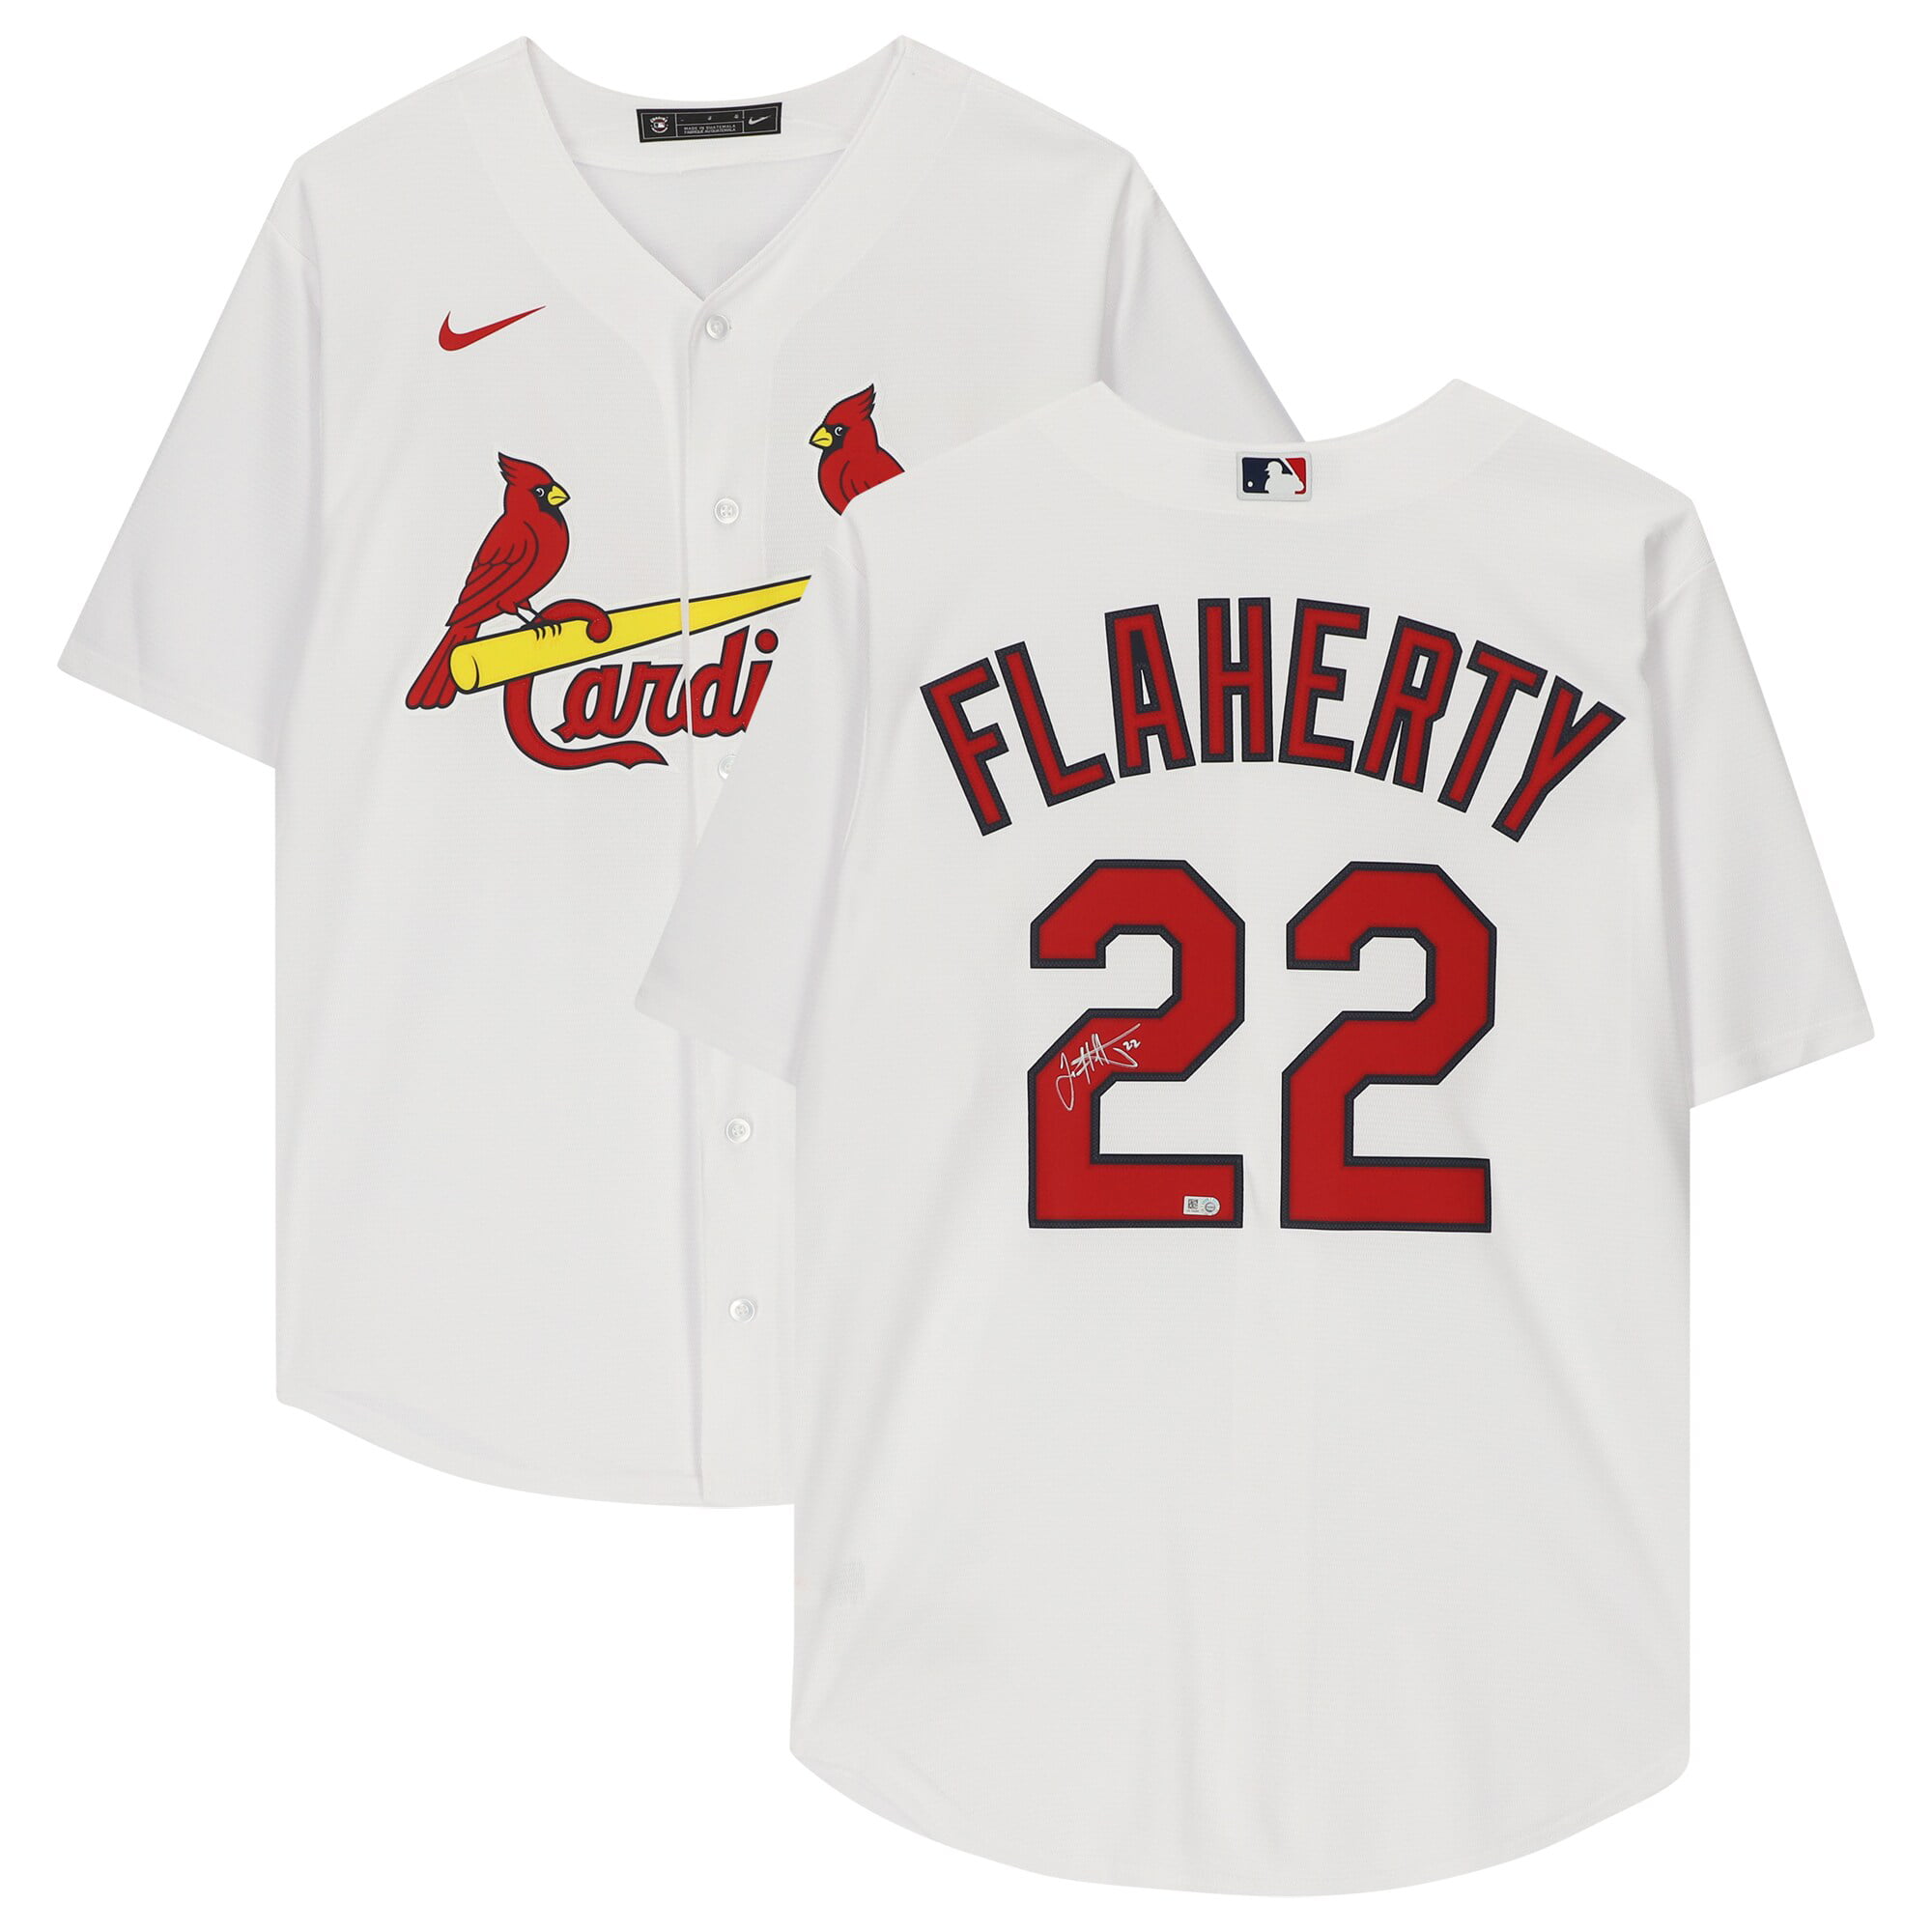 Jack Flaherty Cooperstown Collection Cardinals Jersey White V-Neck Men’s